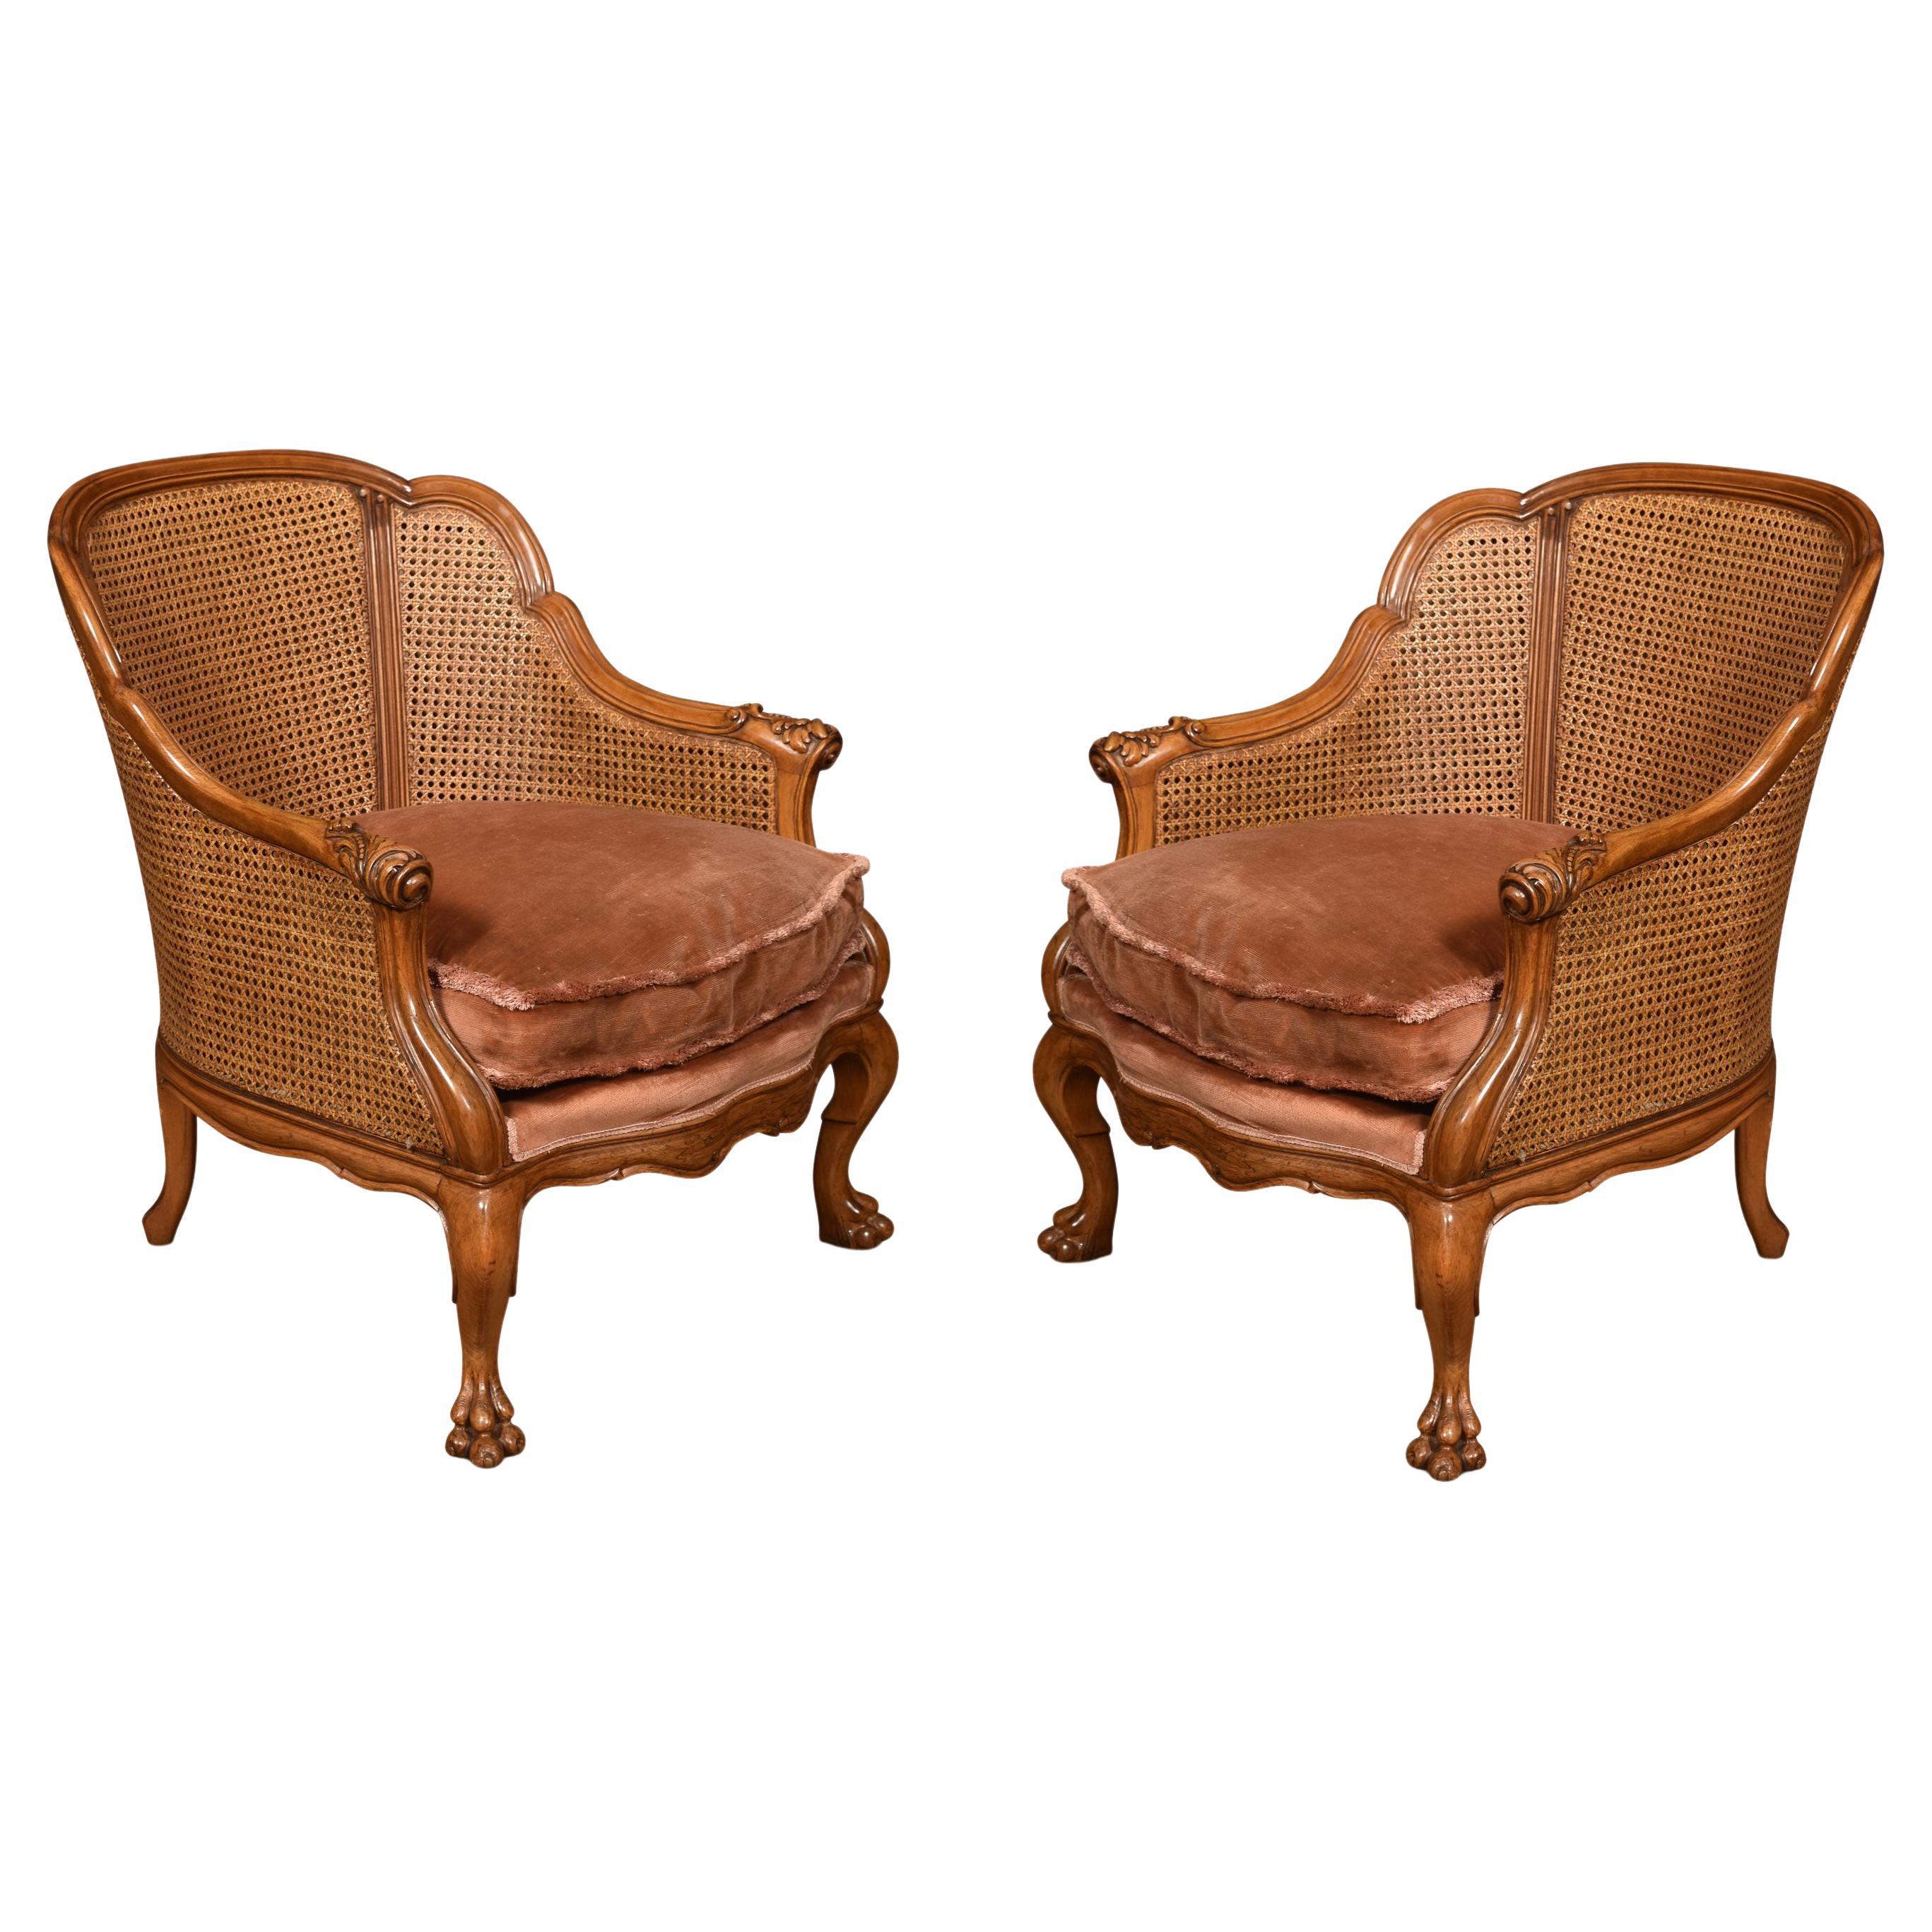 Pair of Walnut Bergere Arm Chairs